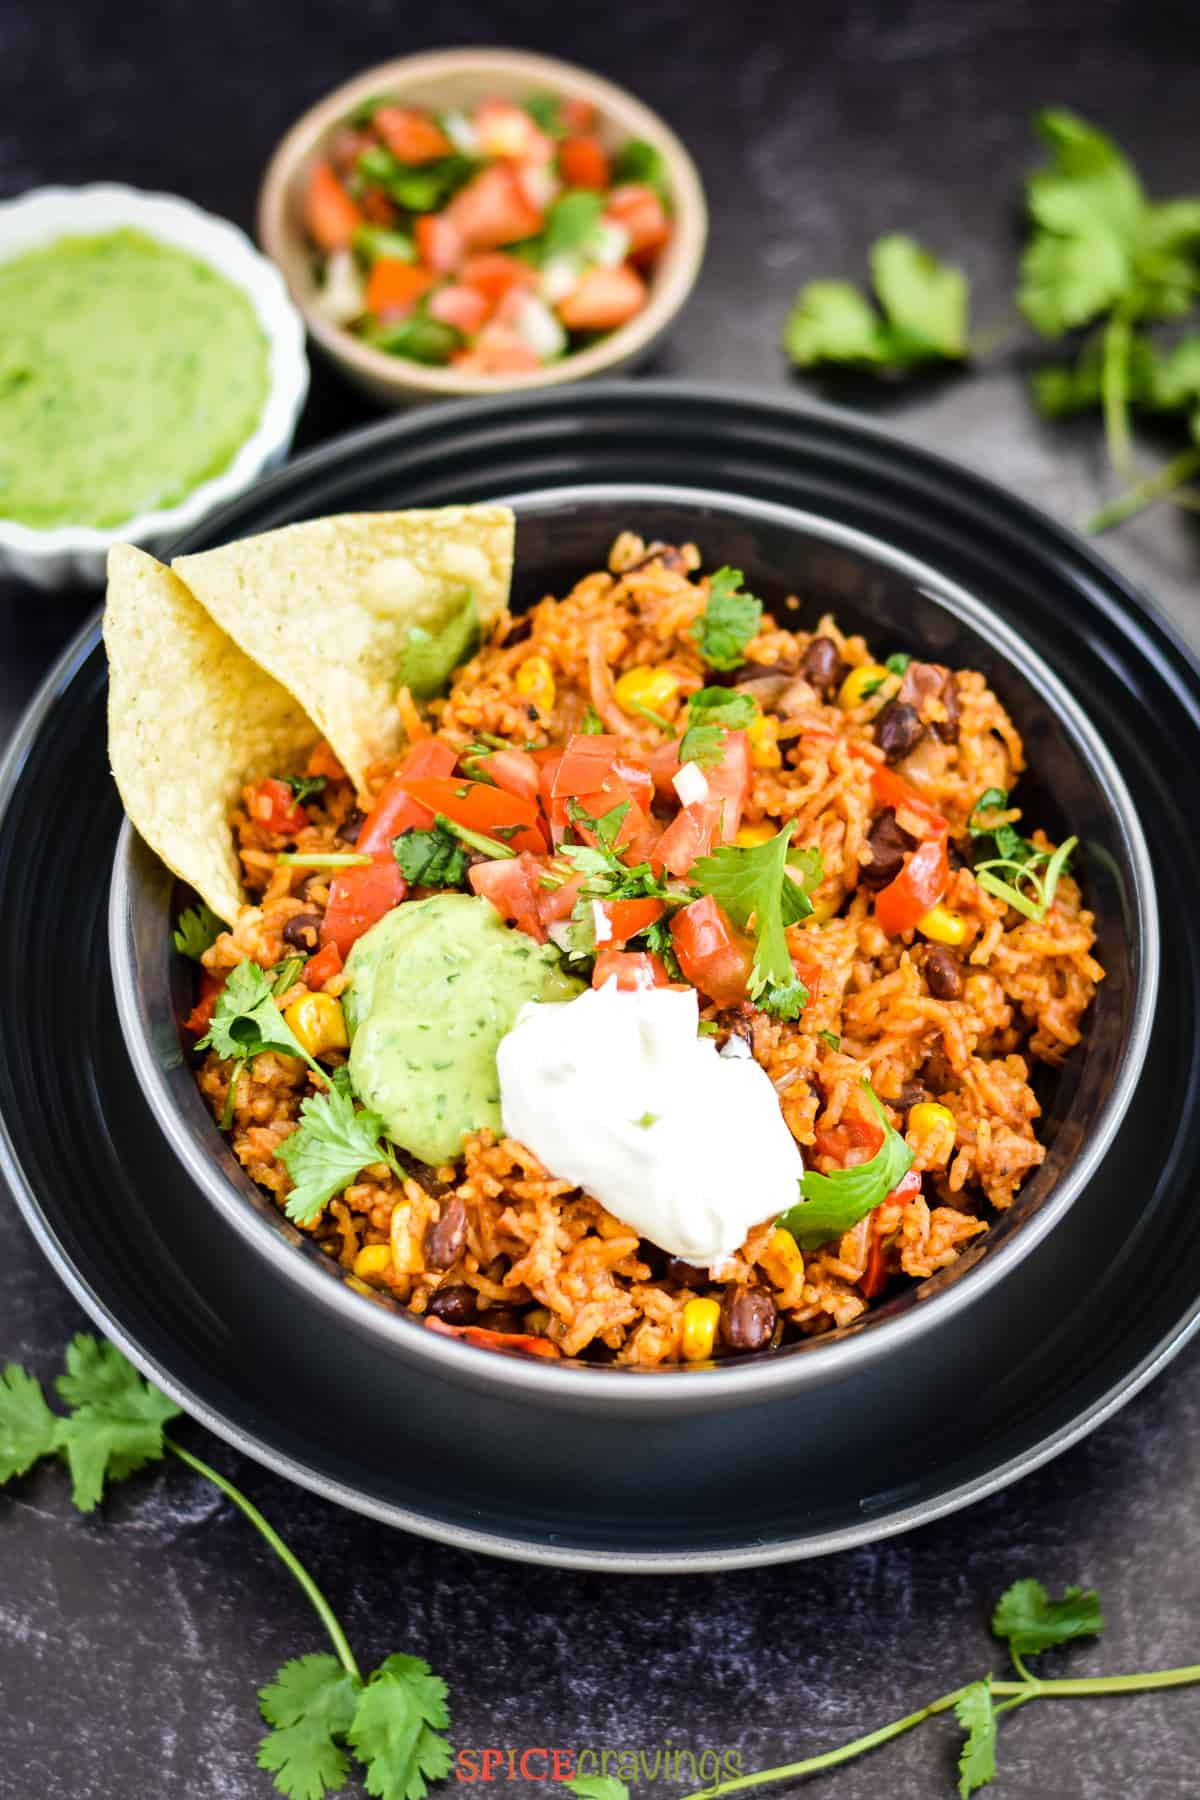 authentic Mexican rice and black beans in black bowl with tortilla chips and sour cream